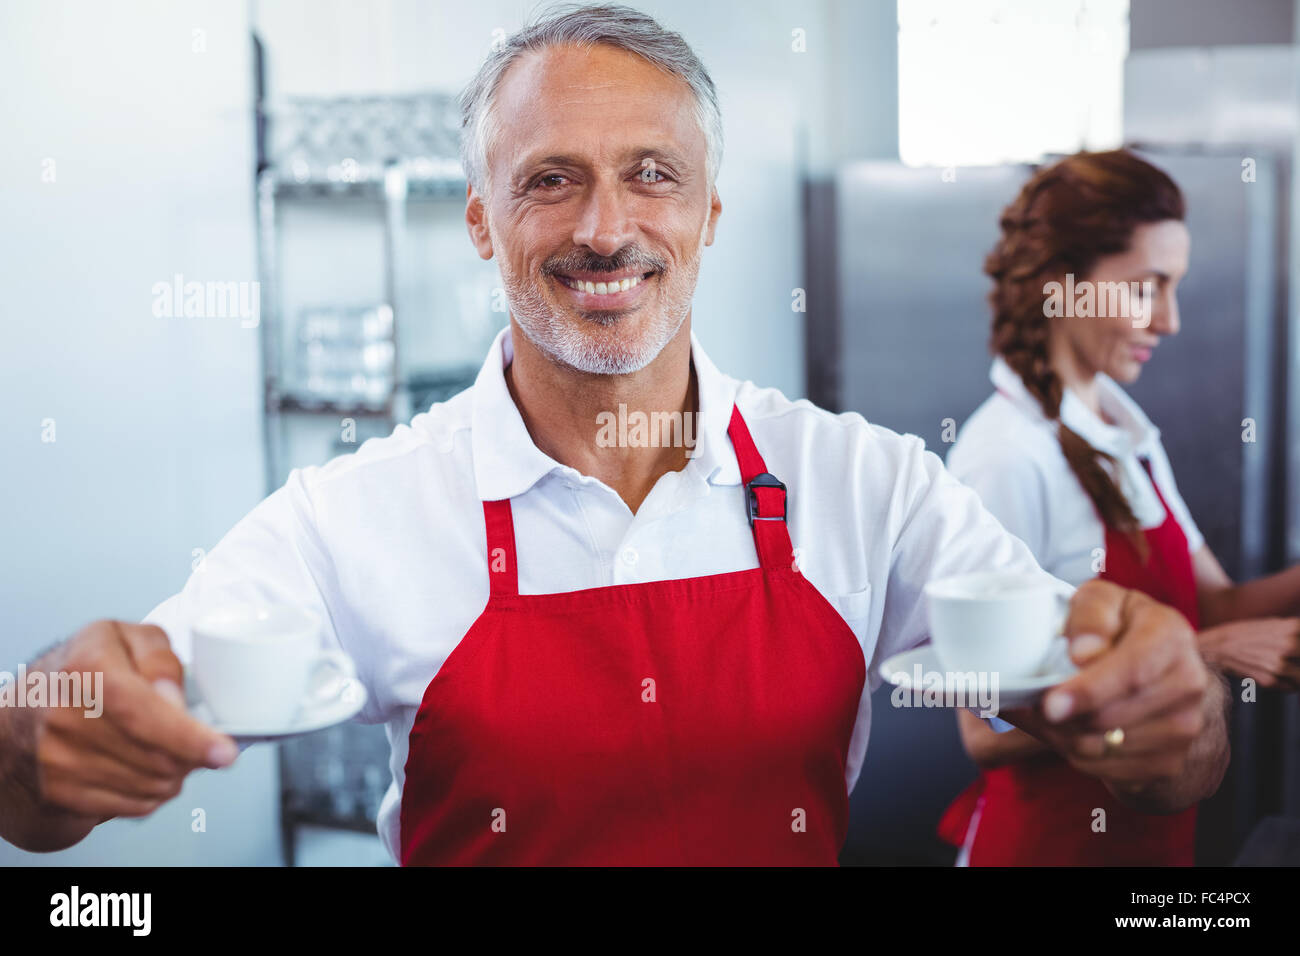 Smiling barista holding cups of coffee with colleague behind Stock Photo